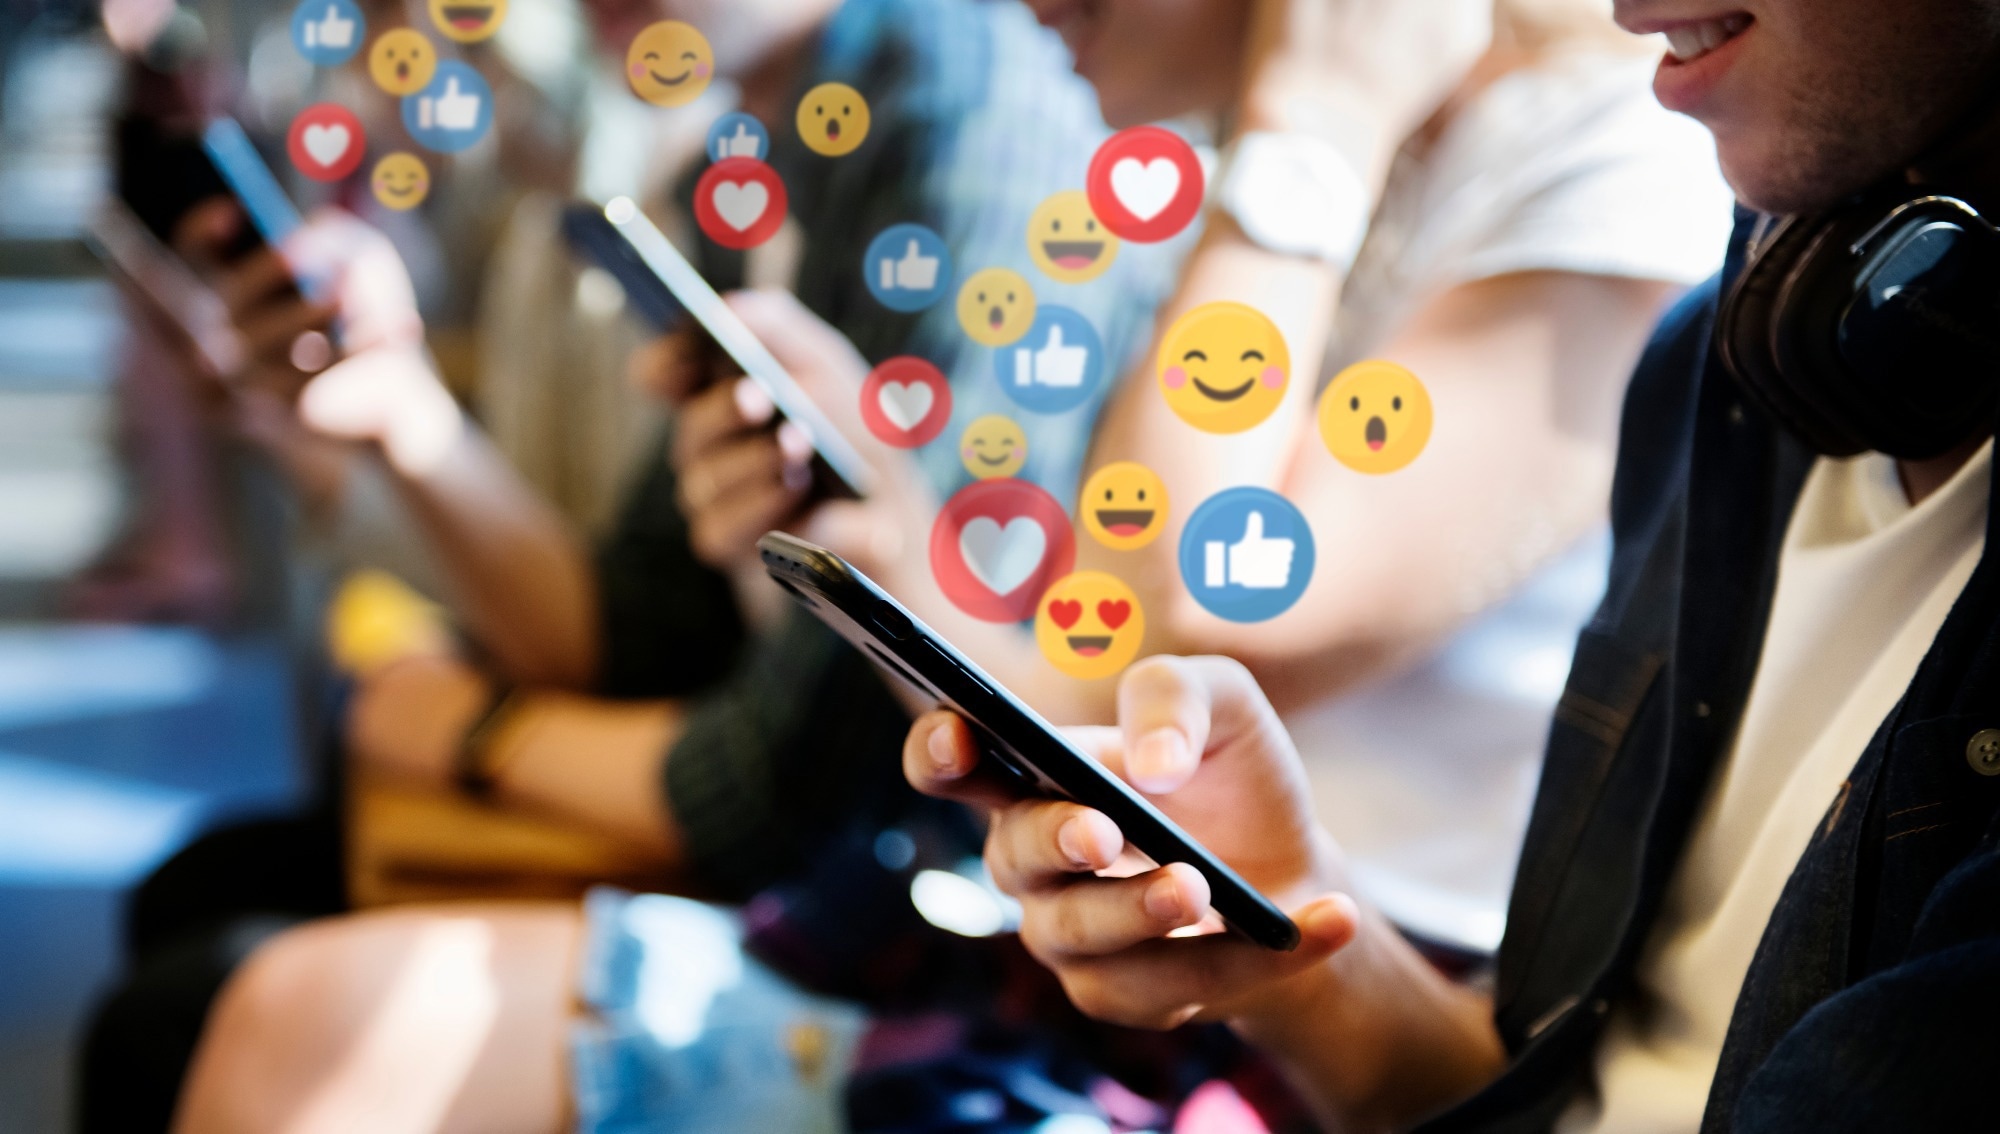 Study: The impact of social media use on body image and disordered eating behaviors: Content matters more than duration of exposure. Image Credit: Rawpixel.com /Shutterstock.com